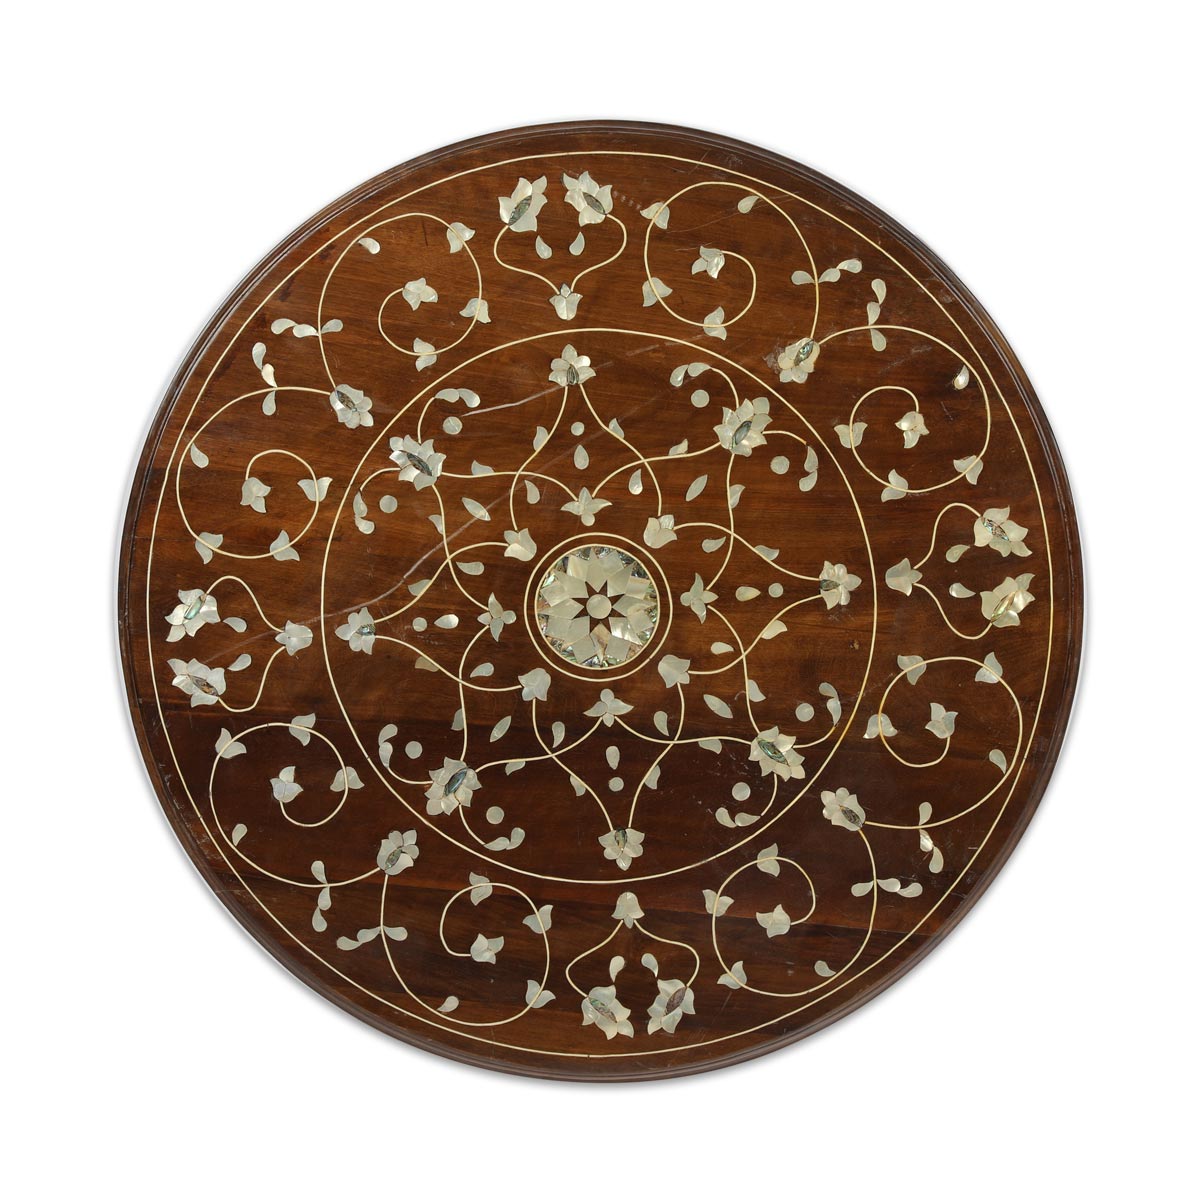 Table Top View of Round Table With Mother of Pearl Inlays